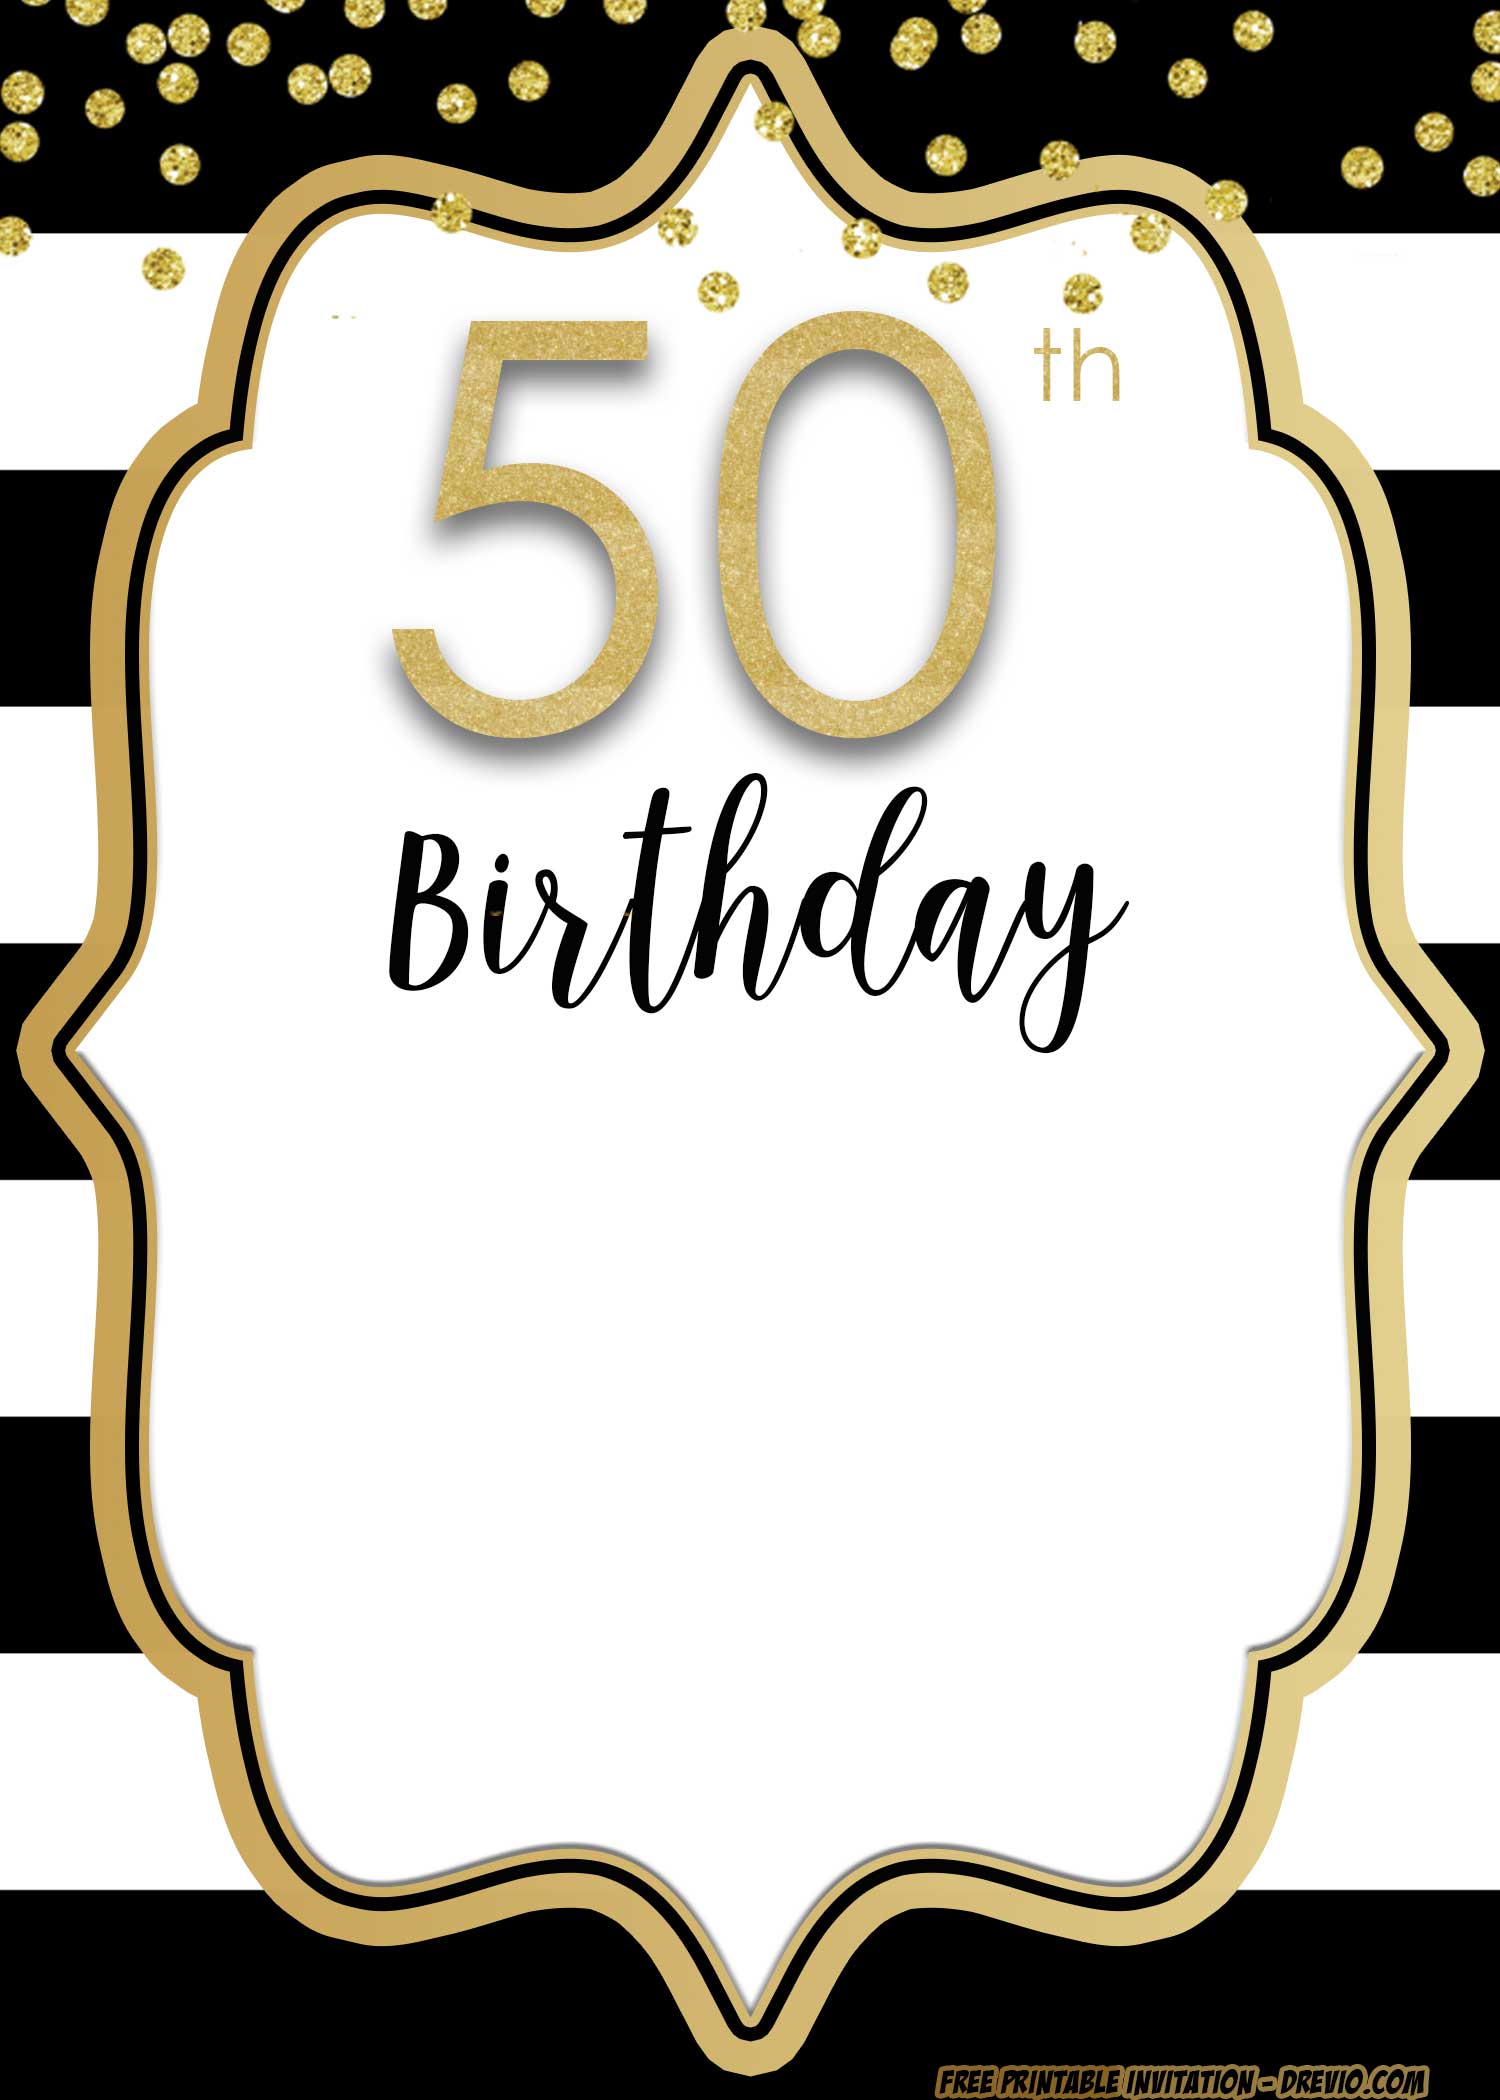 adult-birthday-invitations-template-for-50th-years-old-and-up-drevio